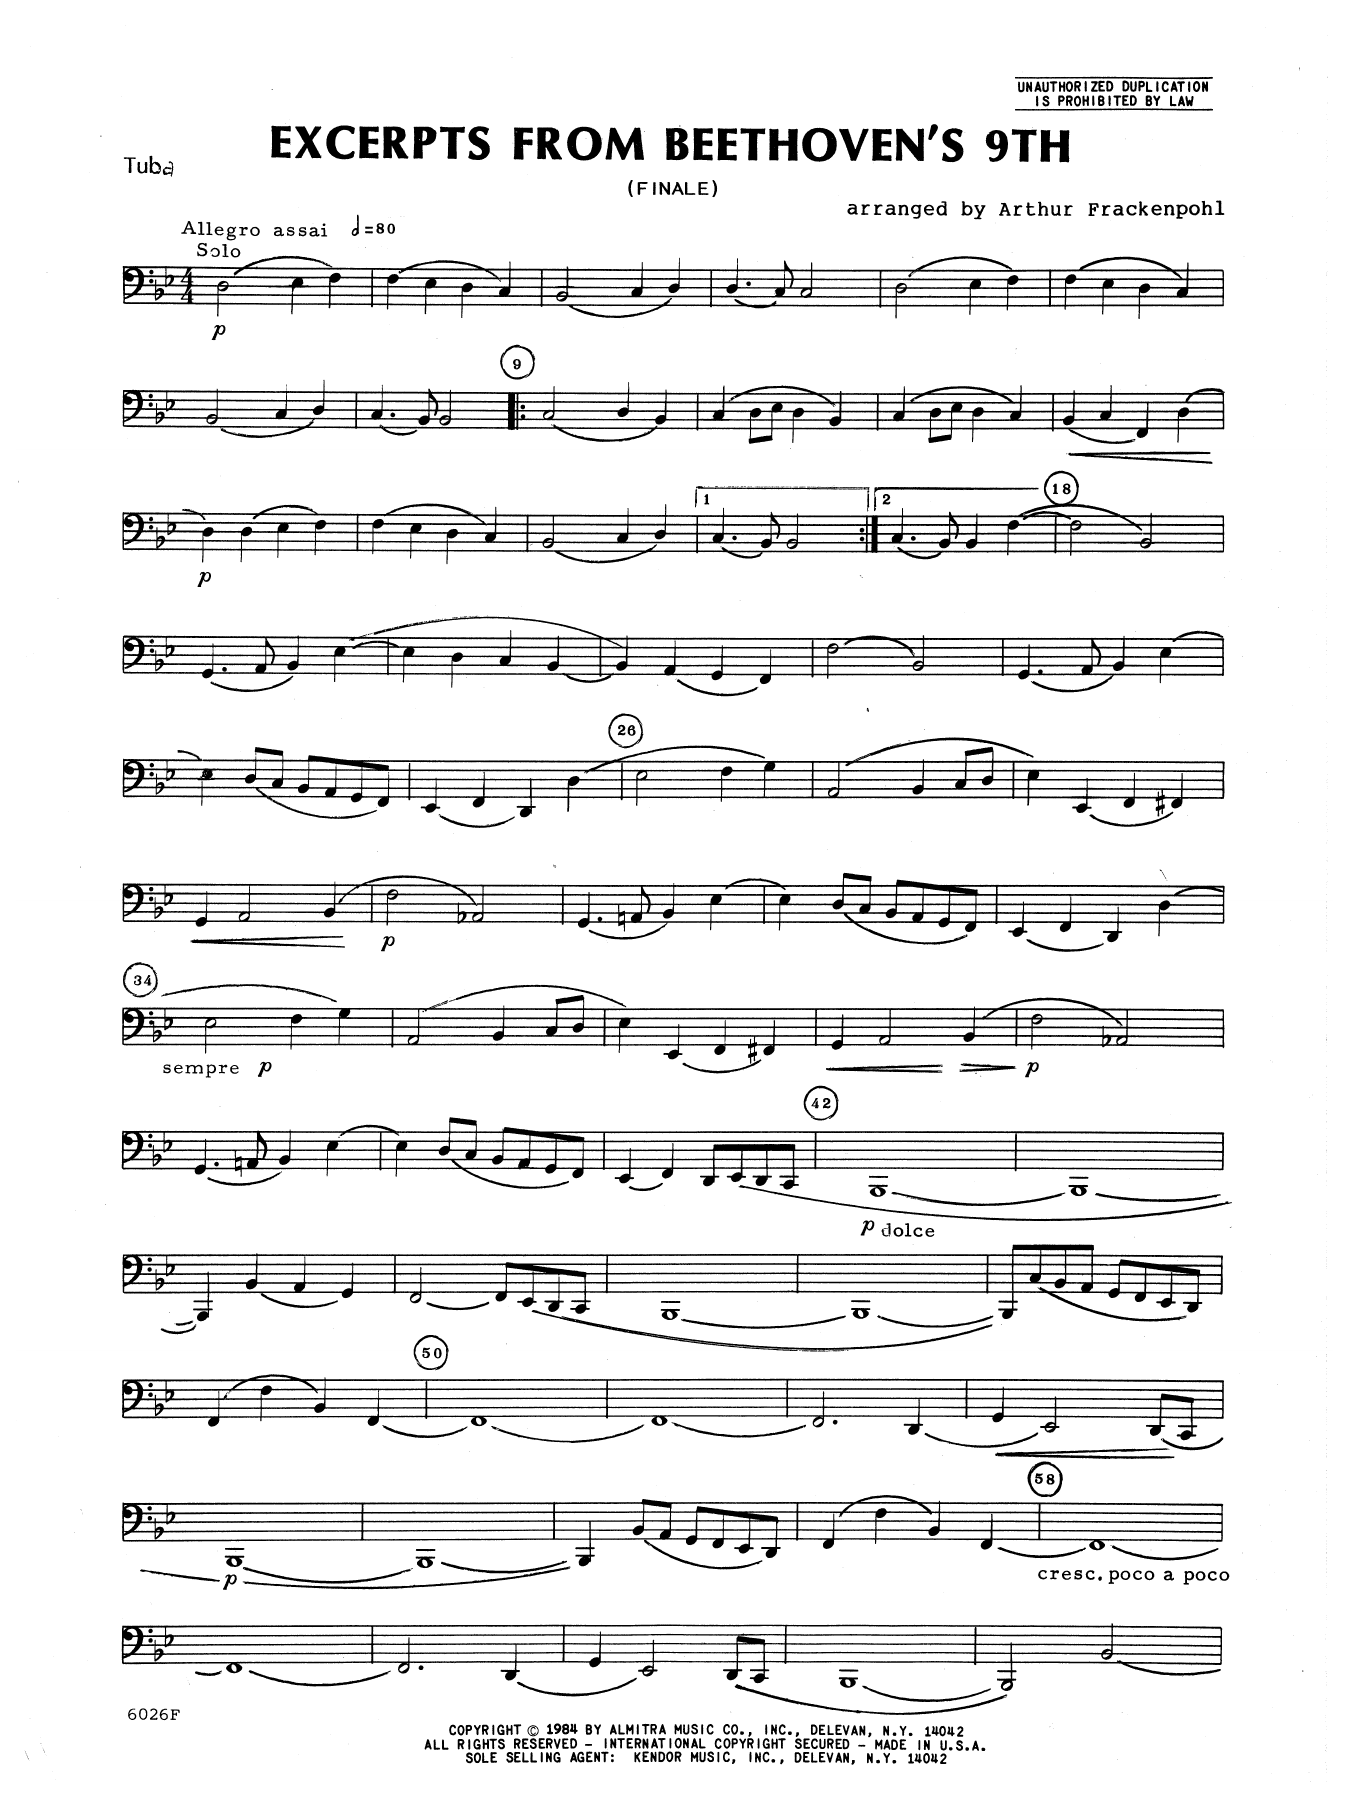 Download Arthur Frackenpohl Excerpts From Beethoven's 9th - Tuba Sheet Music